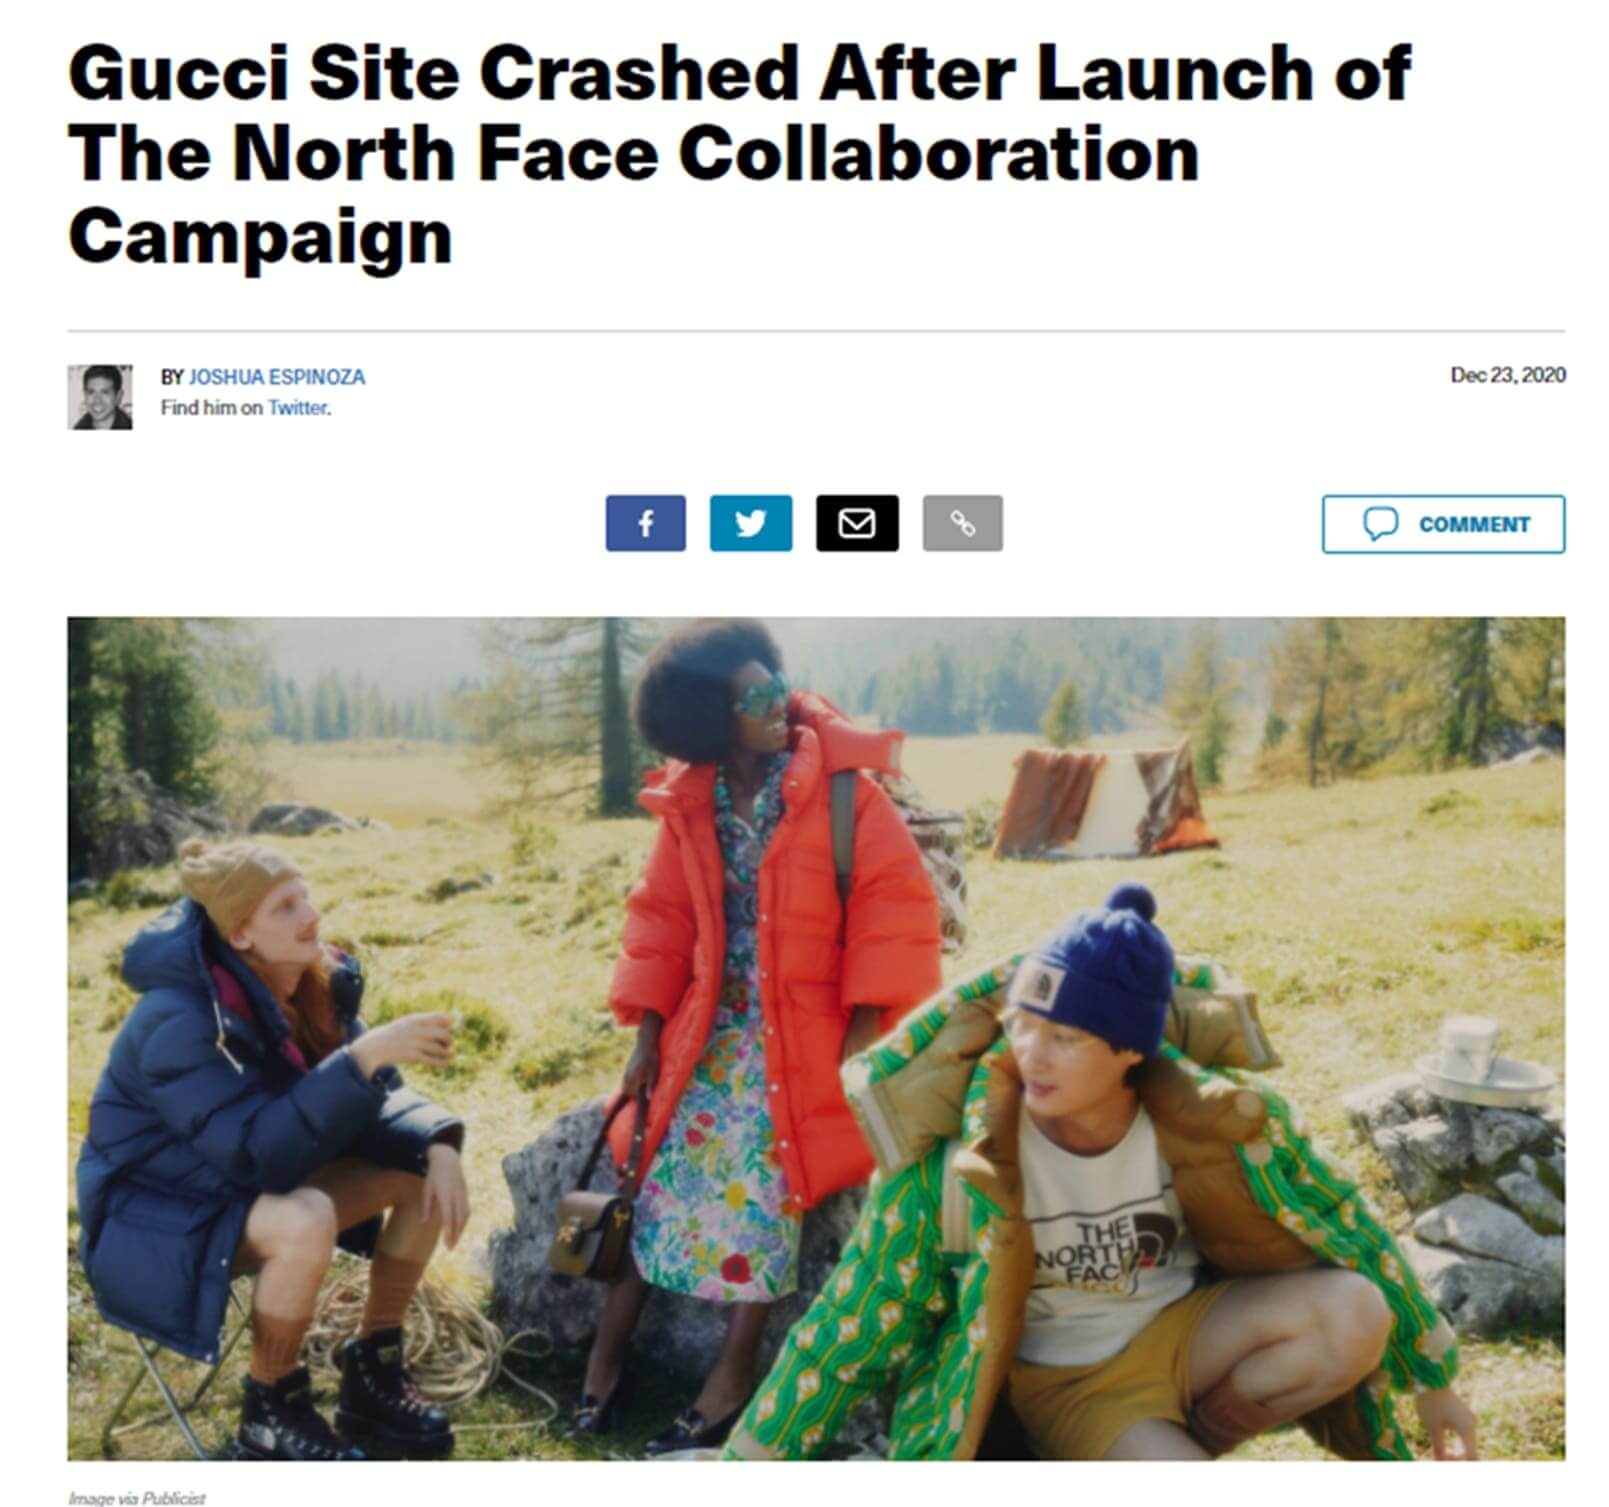 Article: Gucci site crashed after launch of the North Face Collaboration Campaign